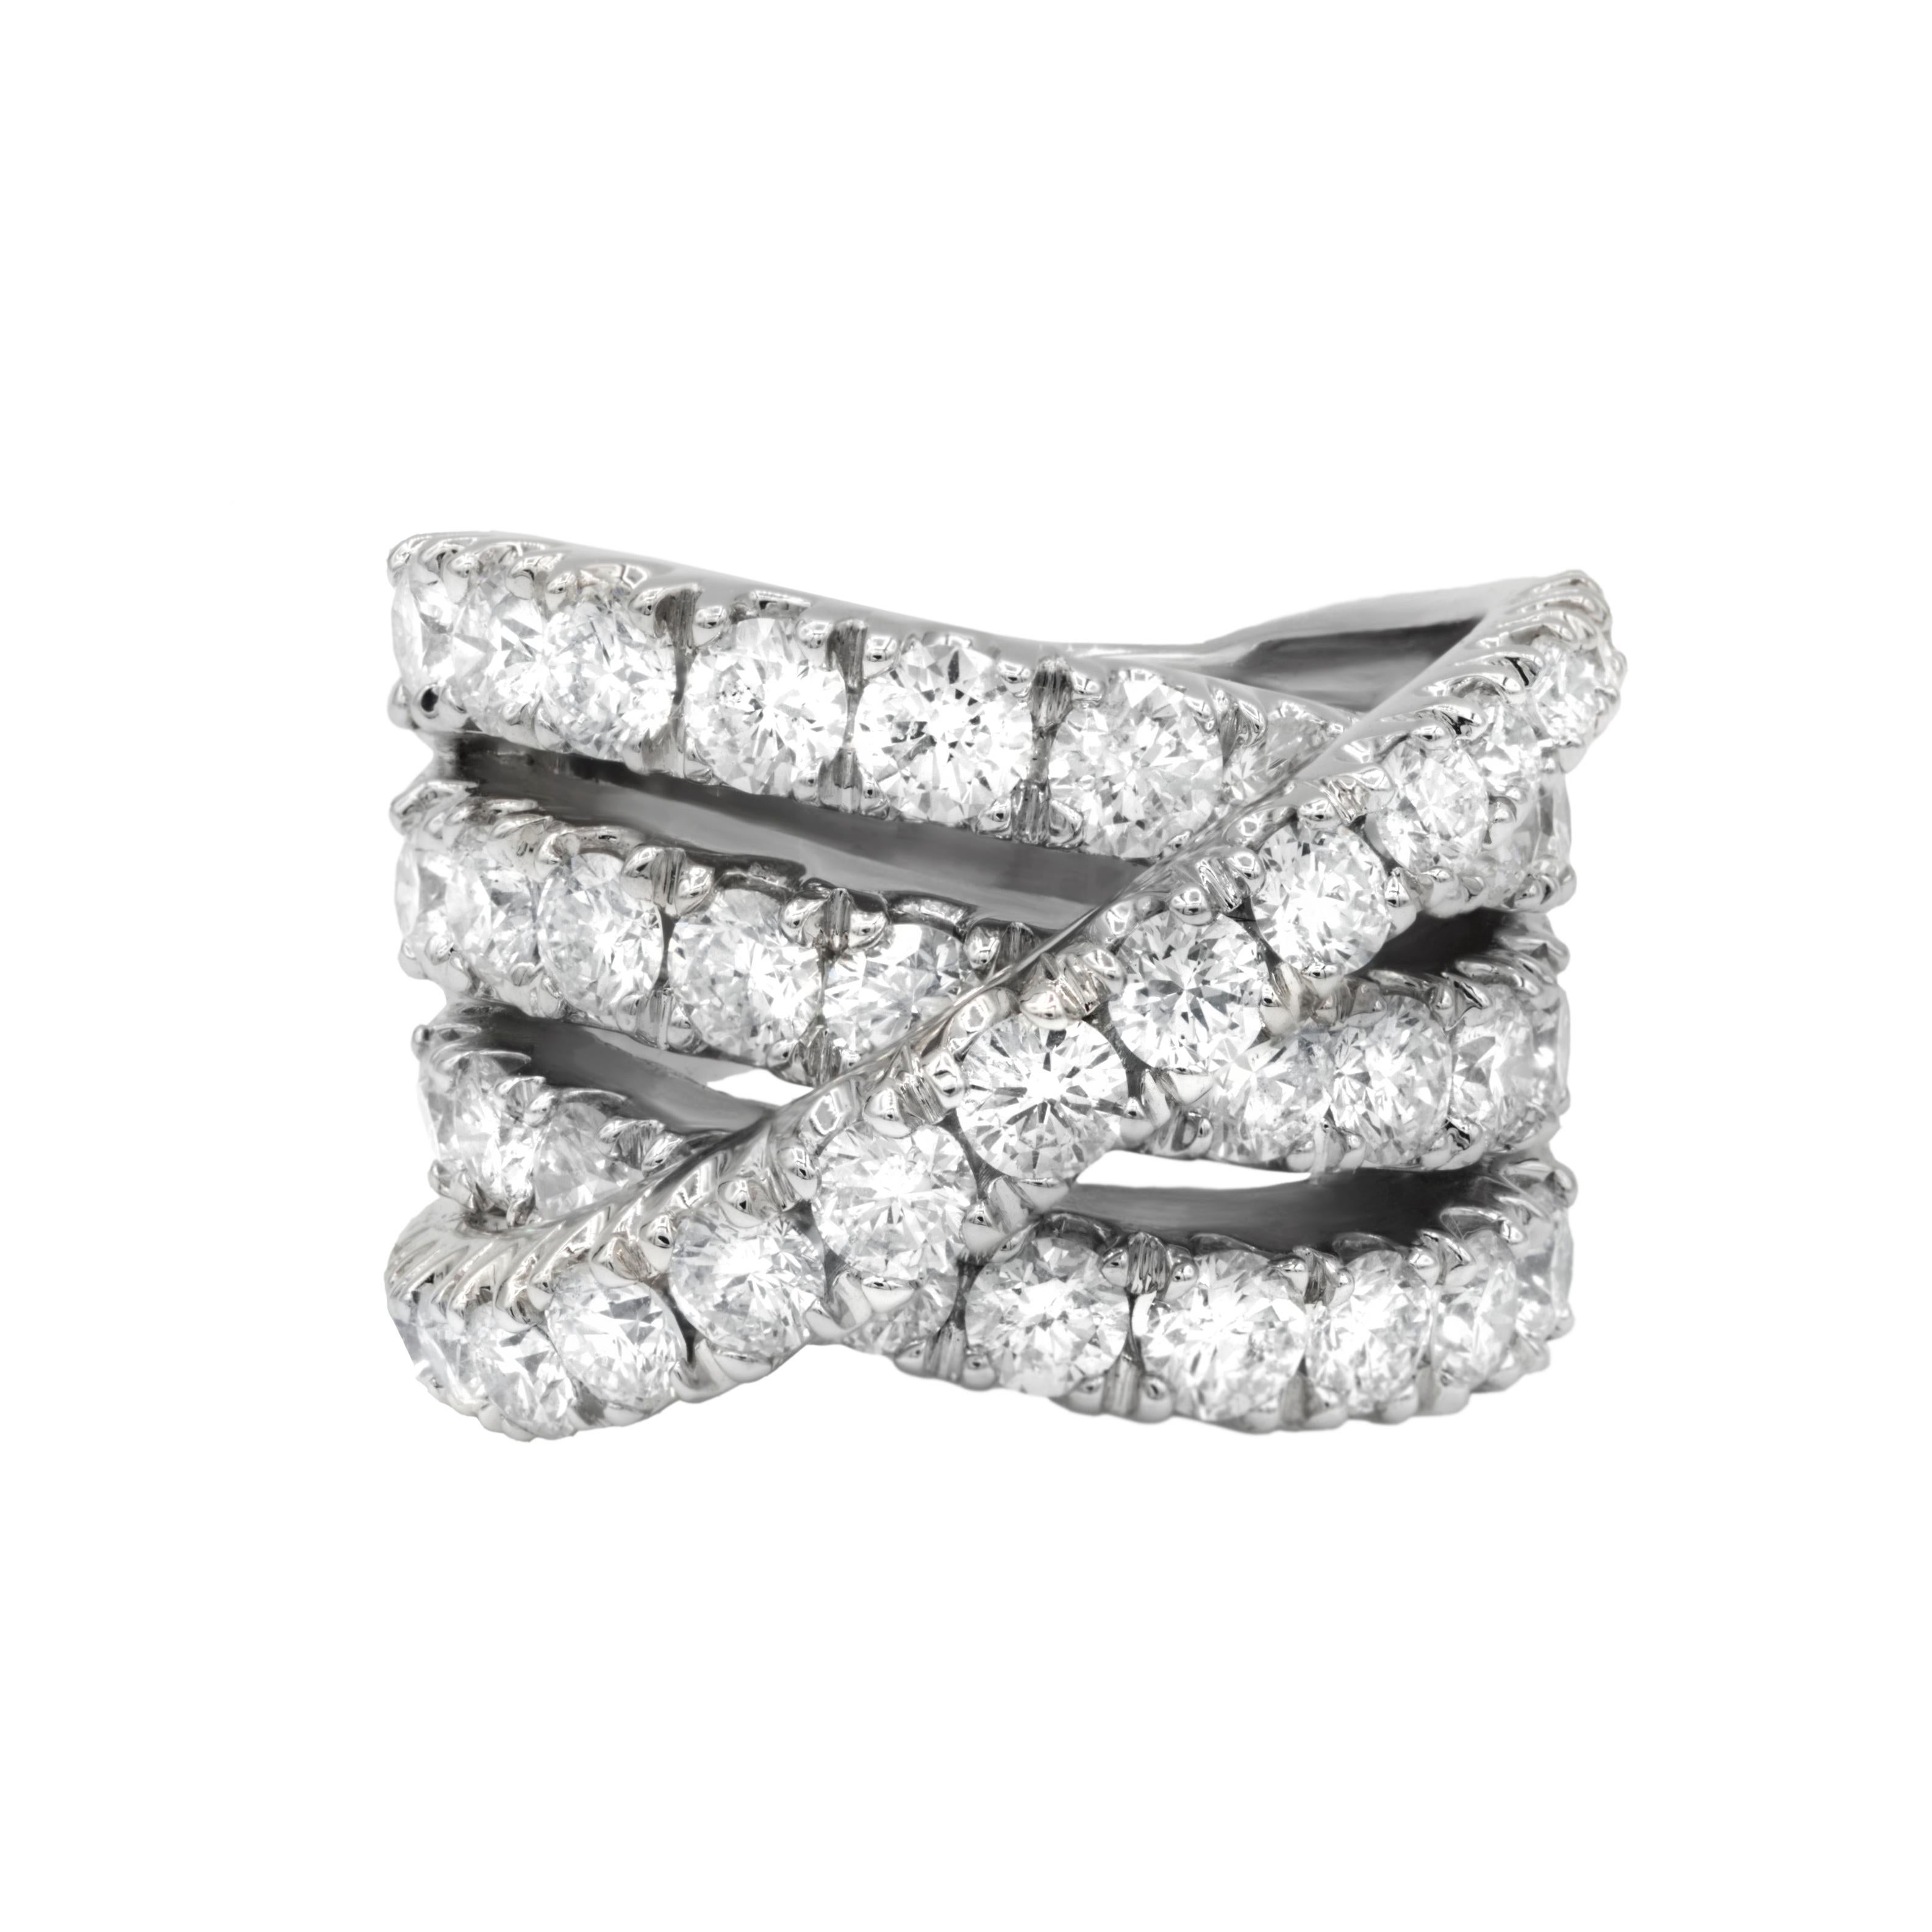 18 kt white gold diamond ring with a 3 row crossed spiral design containing 7.50 cts tw of diamonds.
Diana M. is a leading supplier of top-quality fine jewelry for over 35 years.
Diana M is one-stop shop for all your jewelry shopping, carrying line